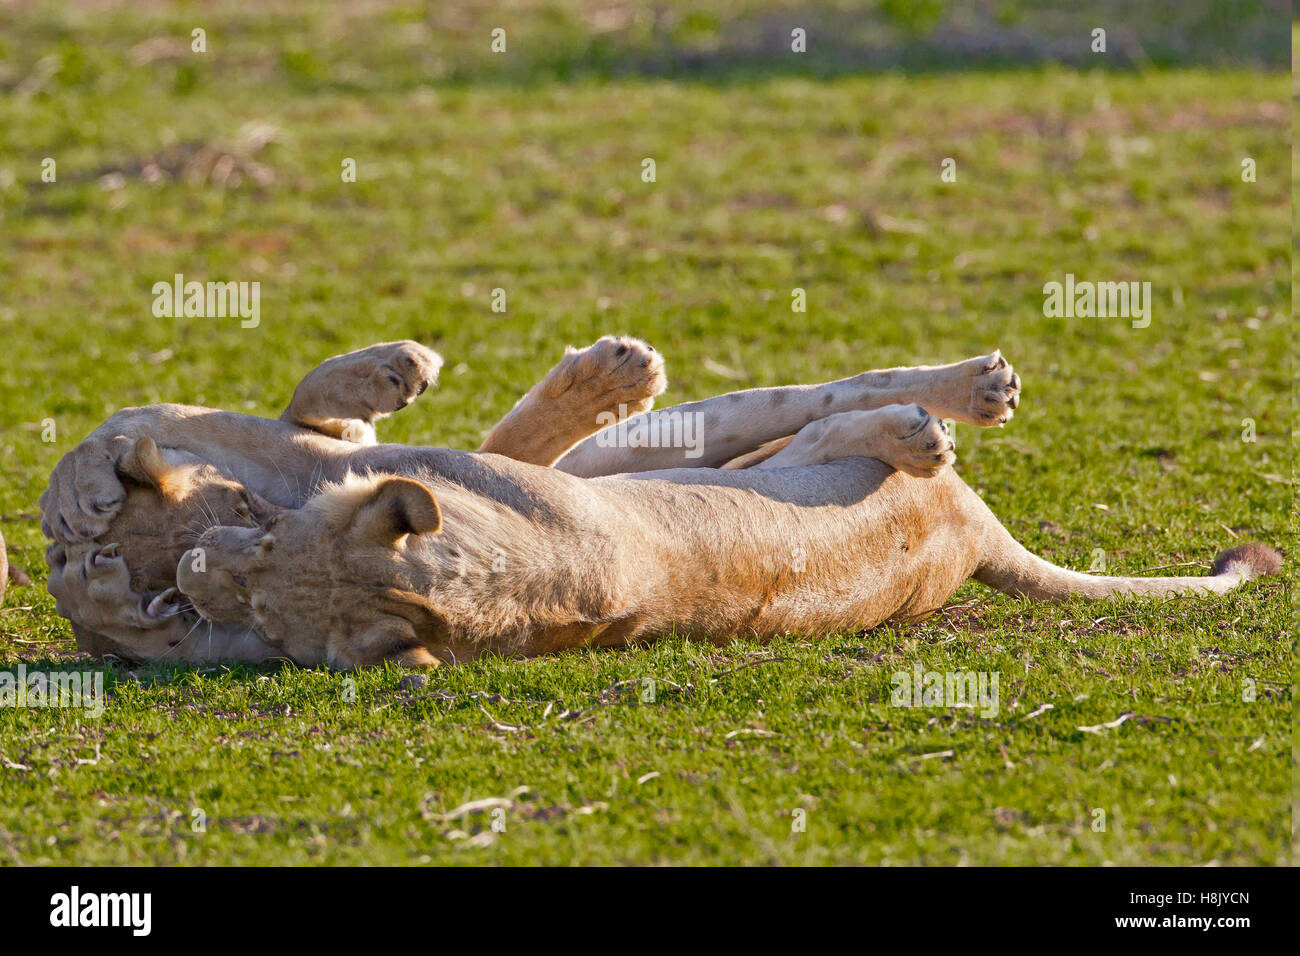 Two sub adult lions PANTHERA LEO romping Stock Photo